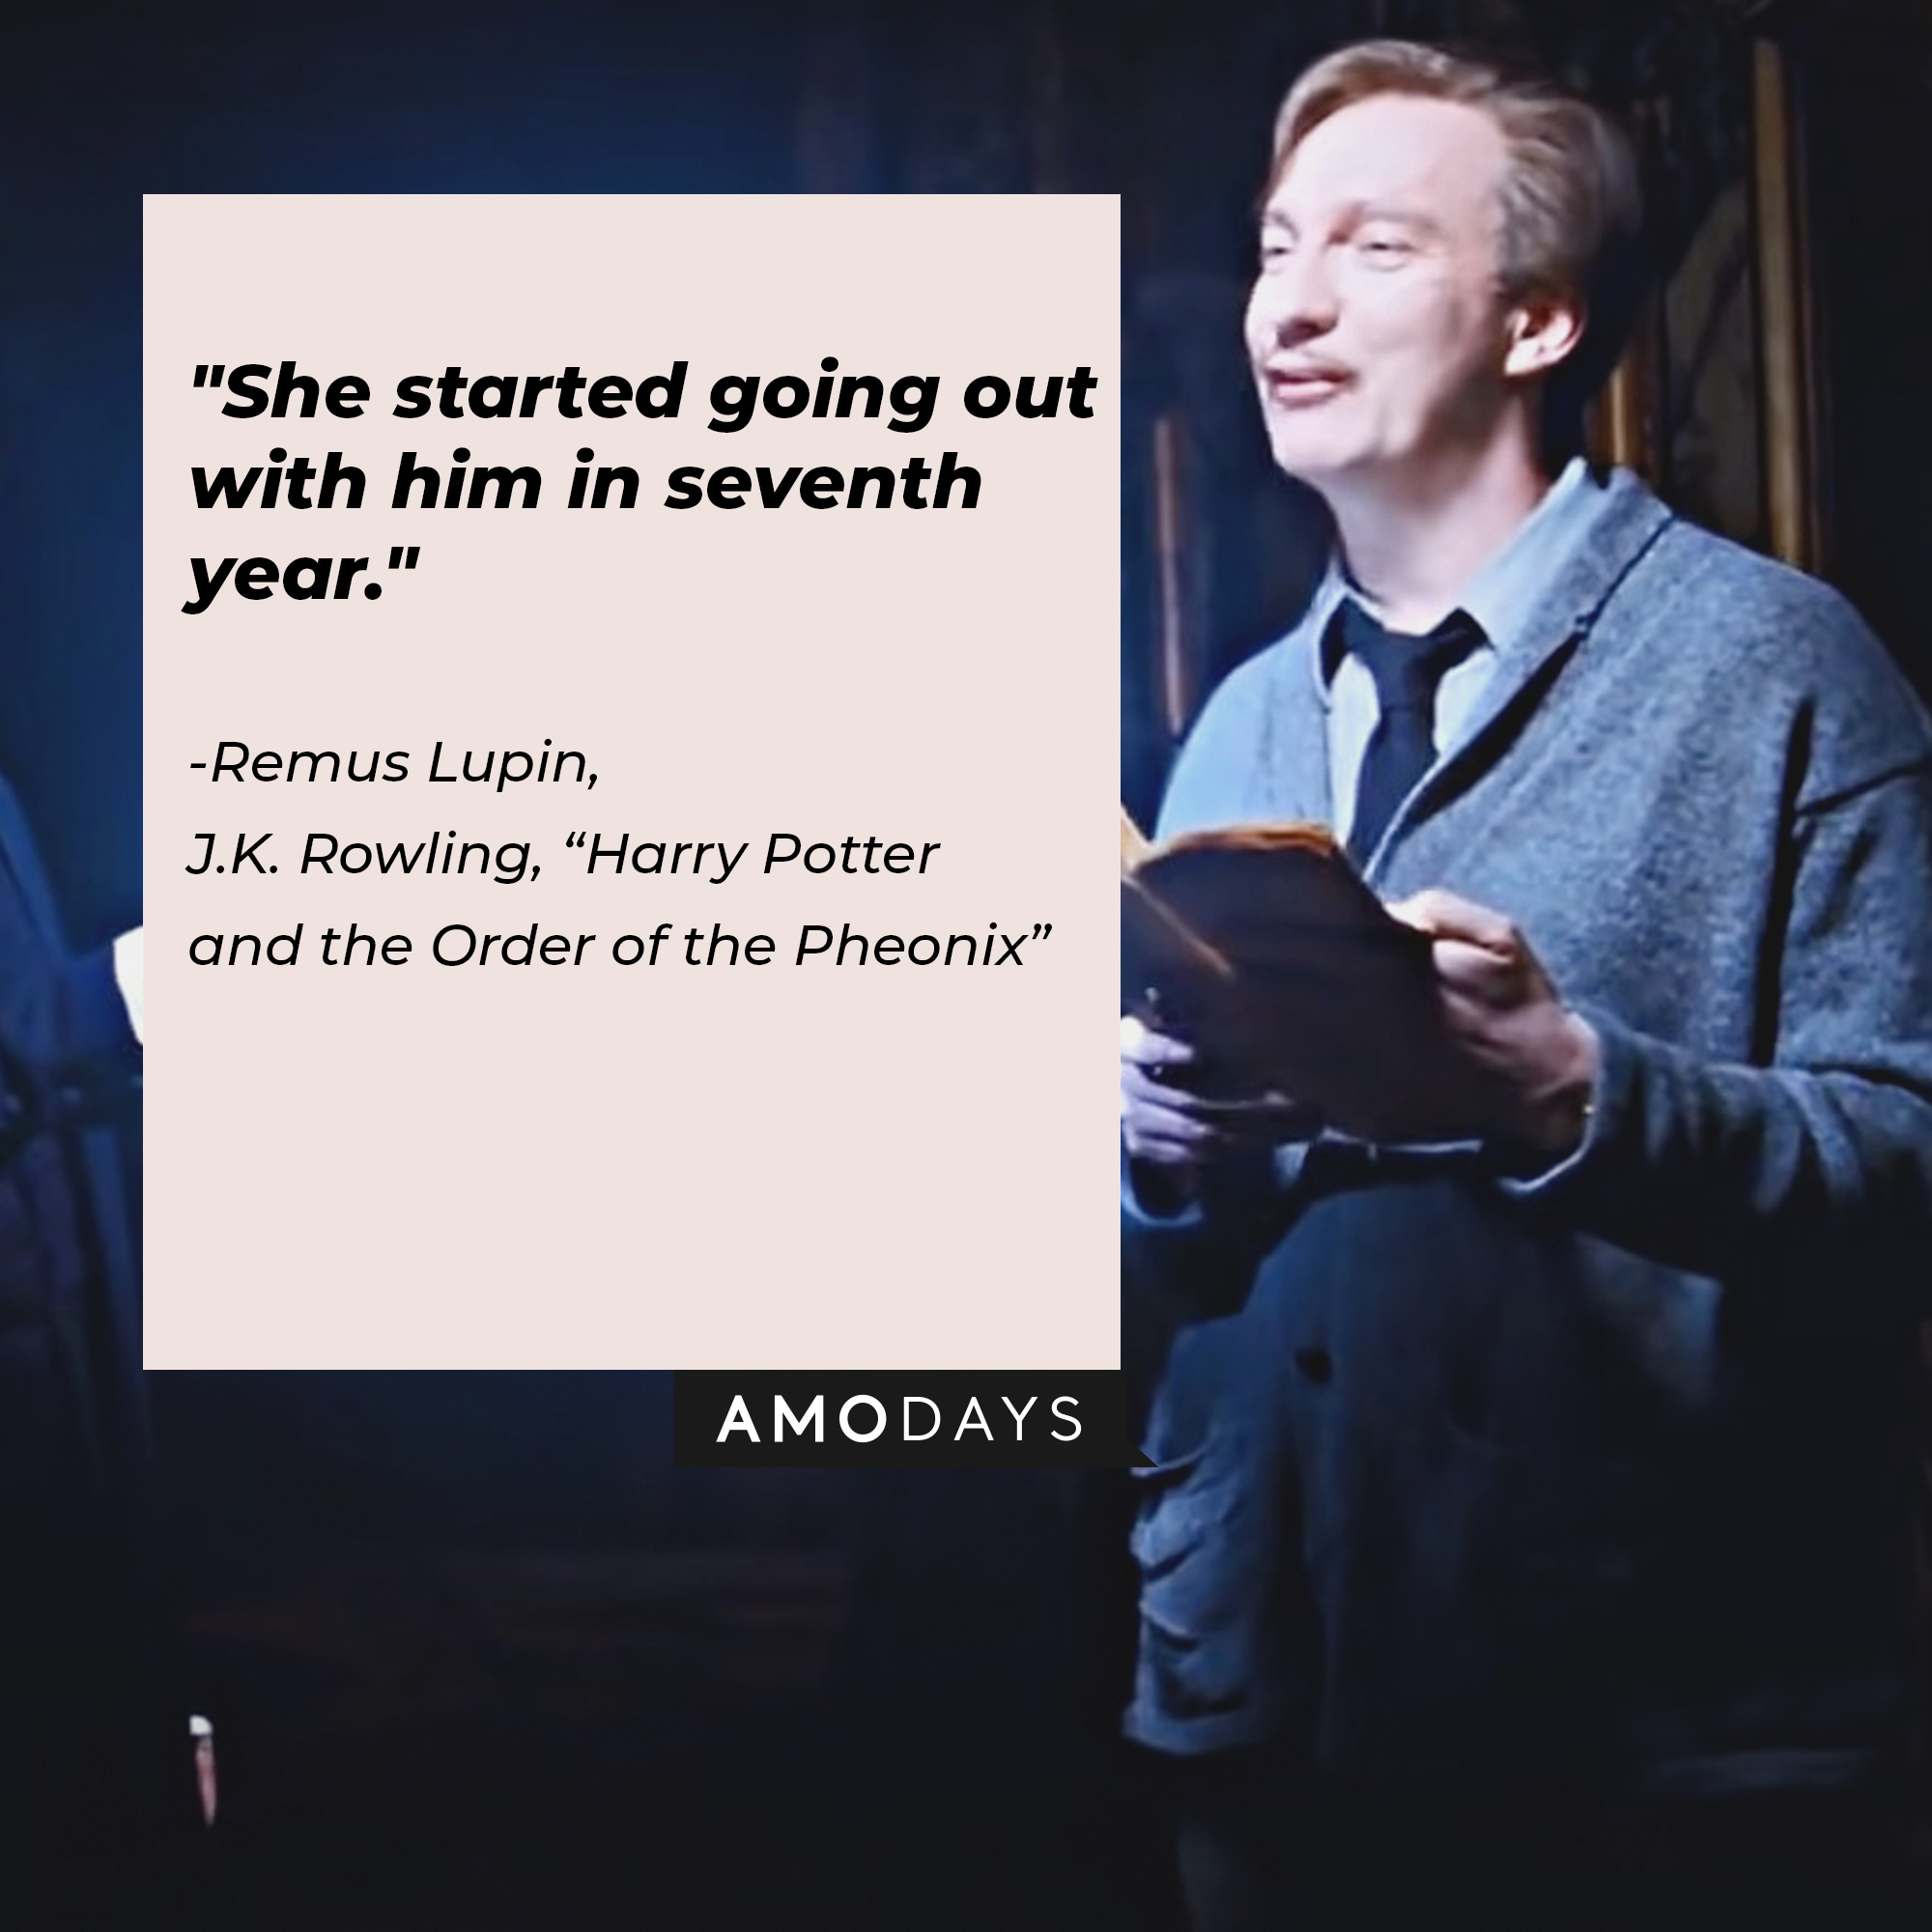 A picture of Remus Lupin with his quote: "She started going out with him in seventh year." | Source: youtube.com/WarnerBrosPictures